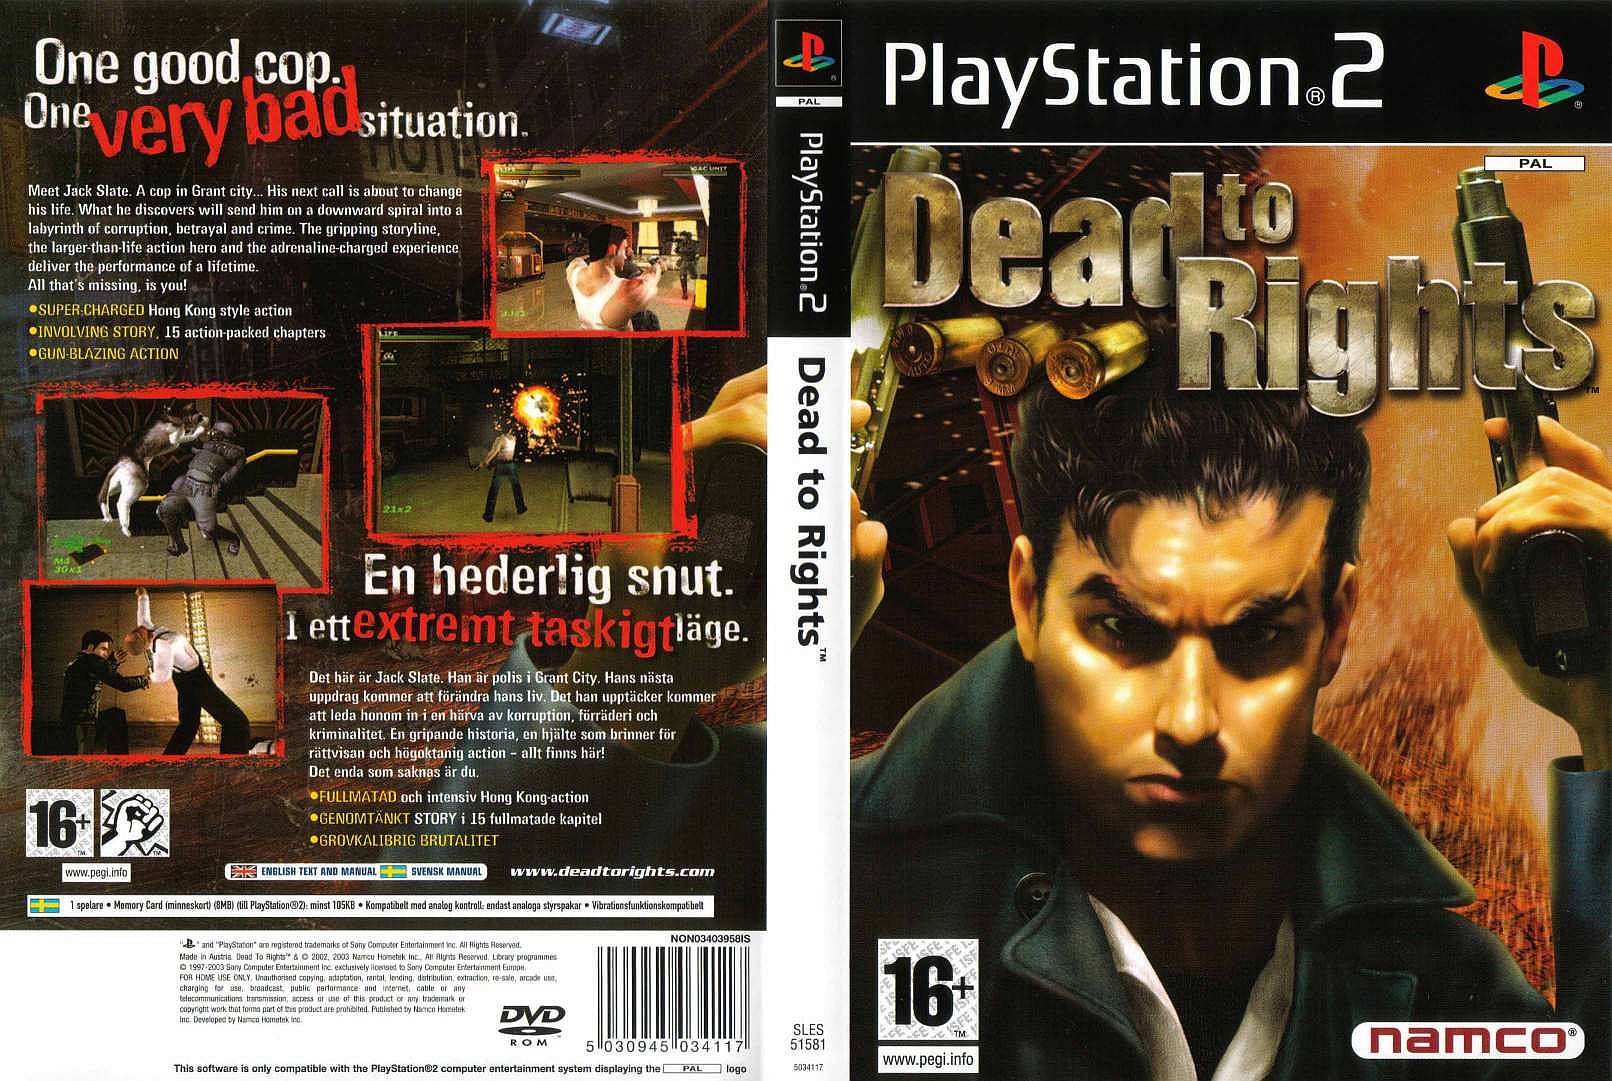 dead to rights 2 ps2